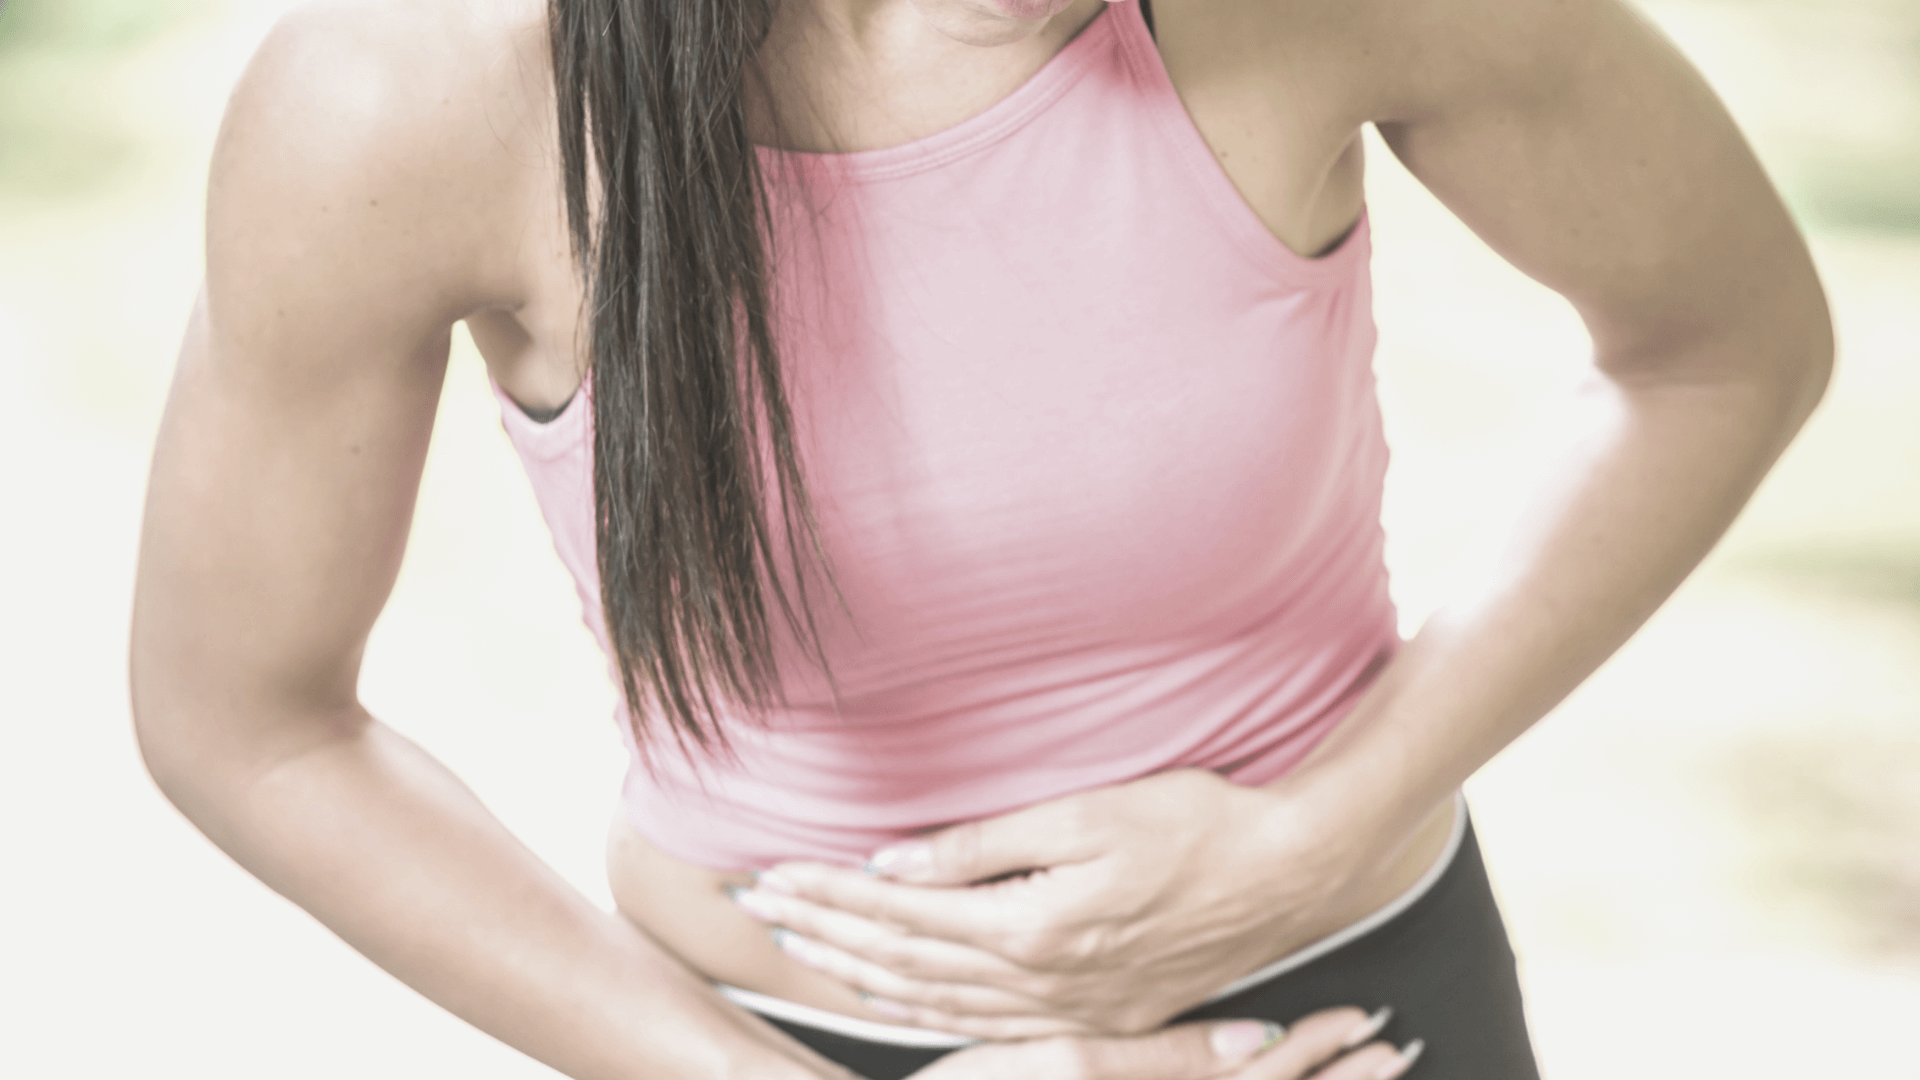 3 Things to do During a Colitis Flare Up